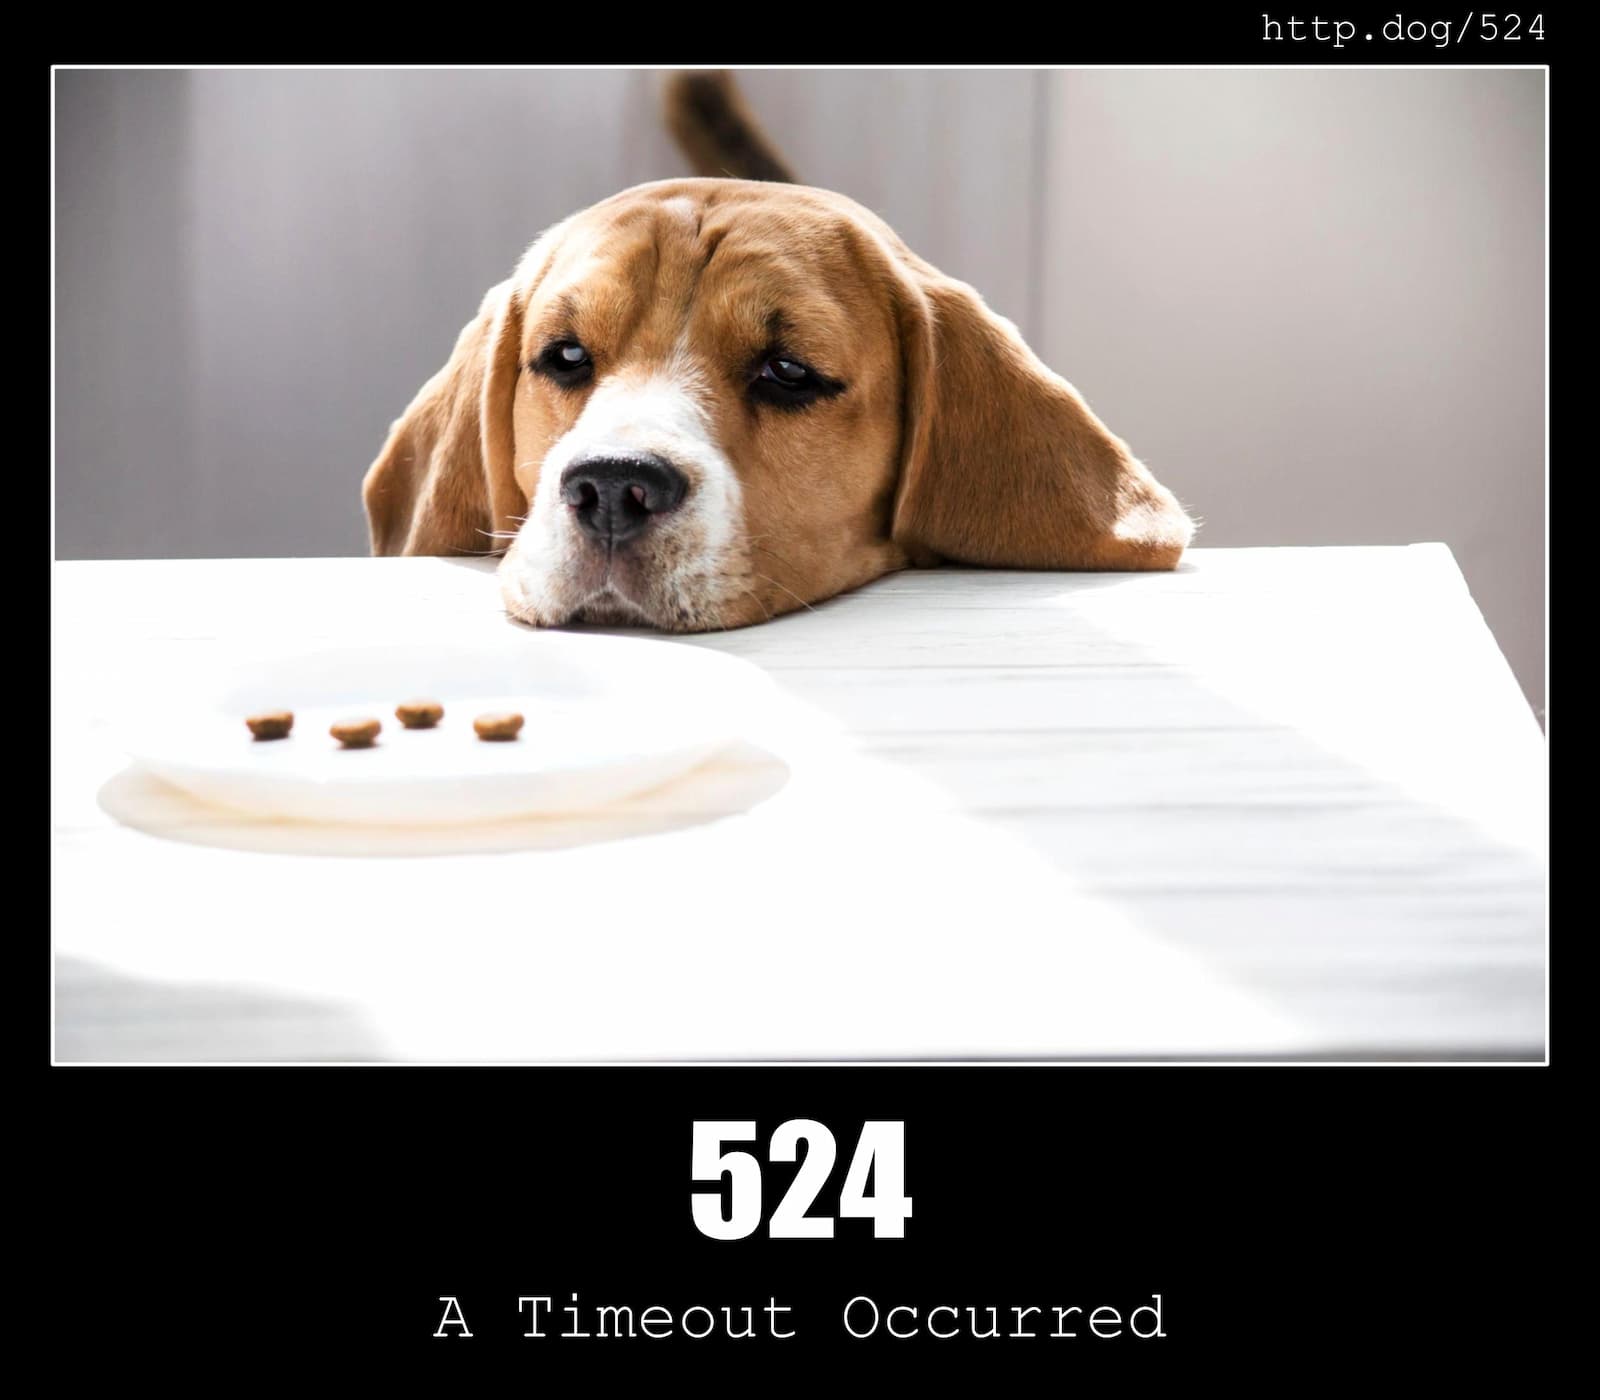 HTTP Status Code 524 A Timeout Occurred & Dogs